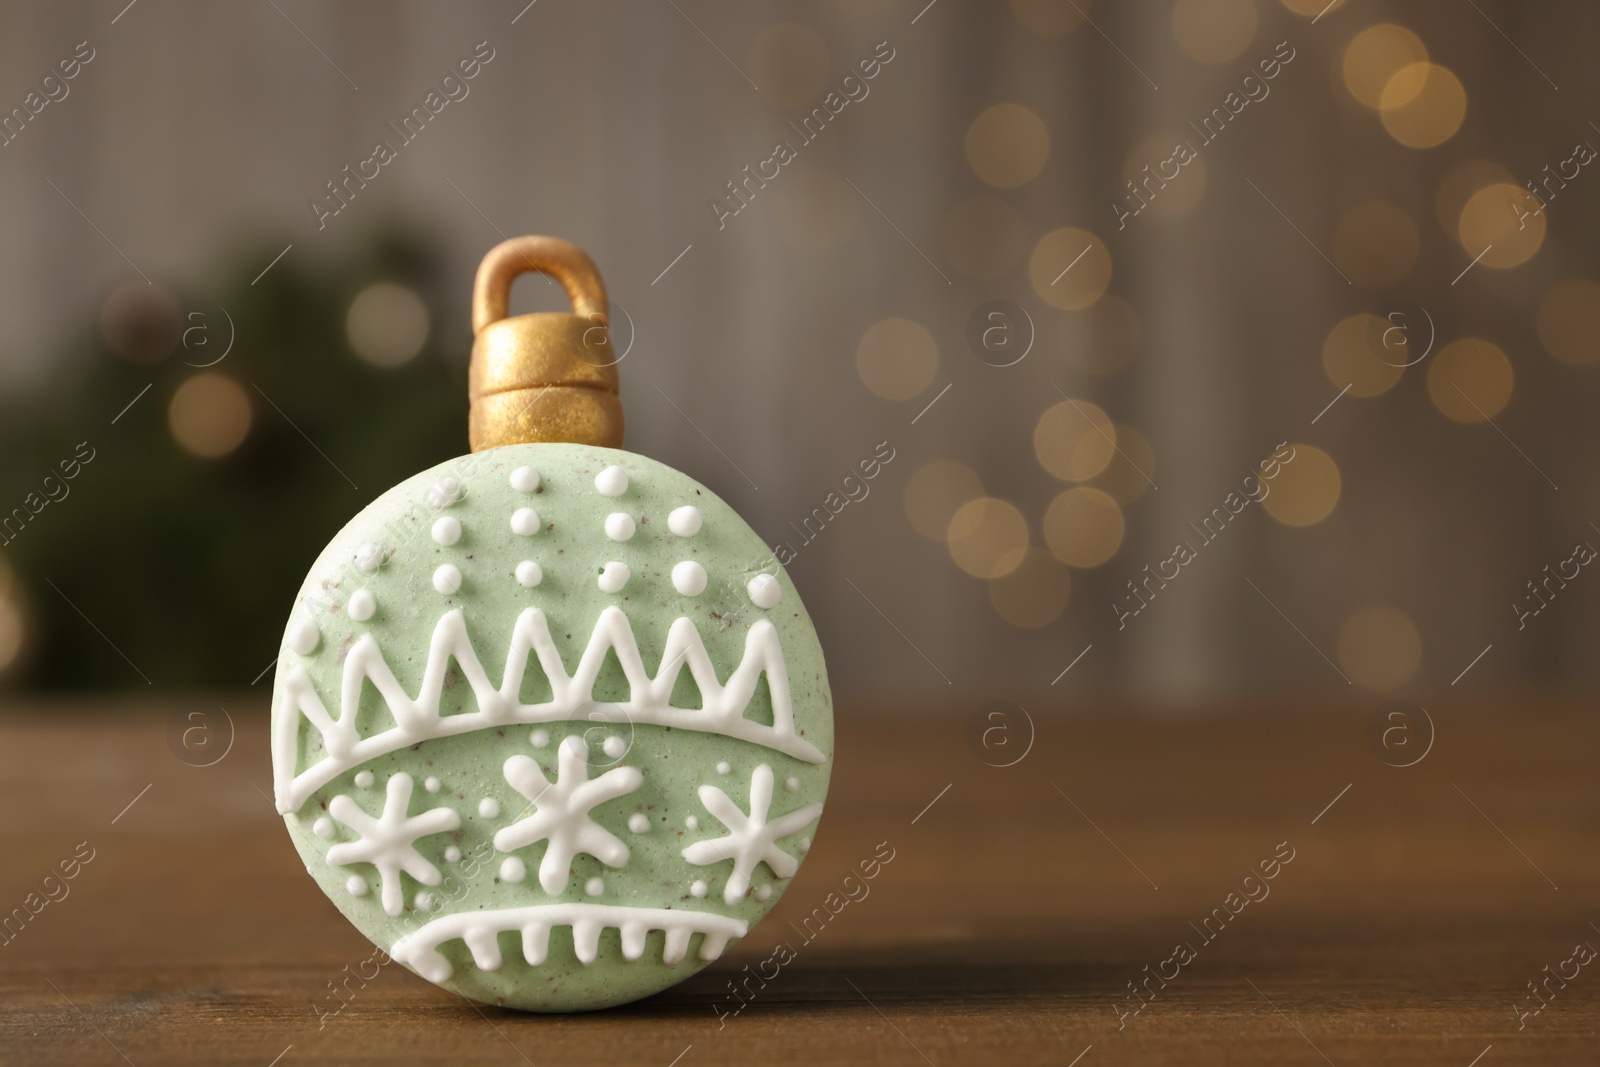 Photo of Beautifully decorated Christmas macaron on wooden table against blurred festive lights, space for text